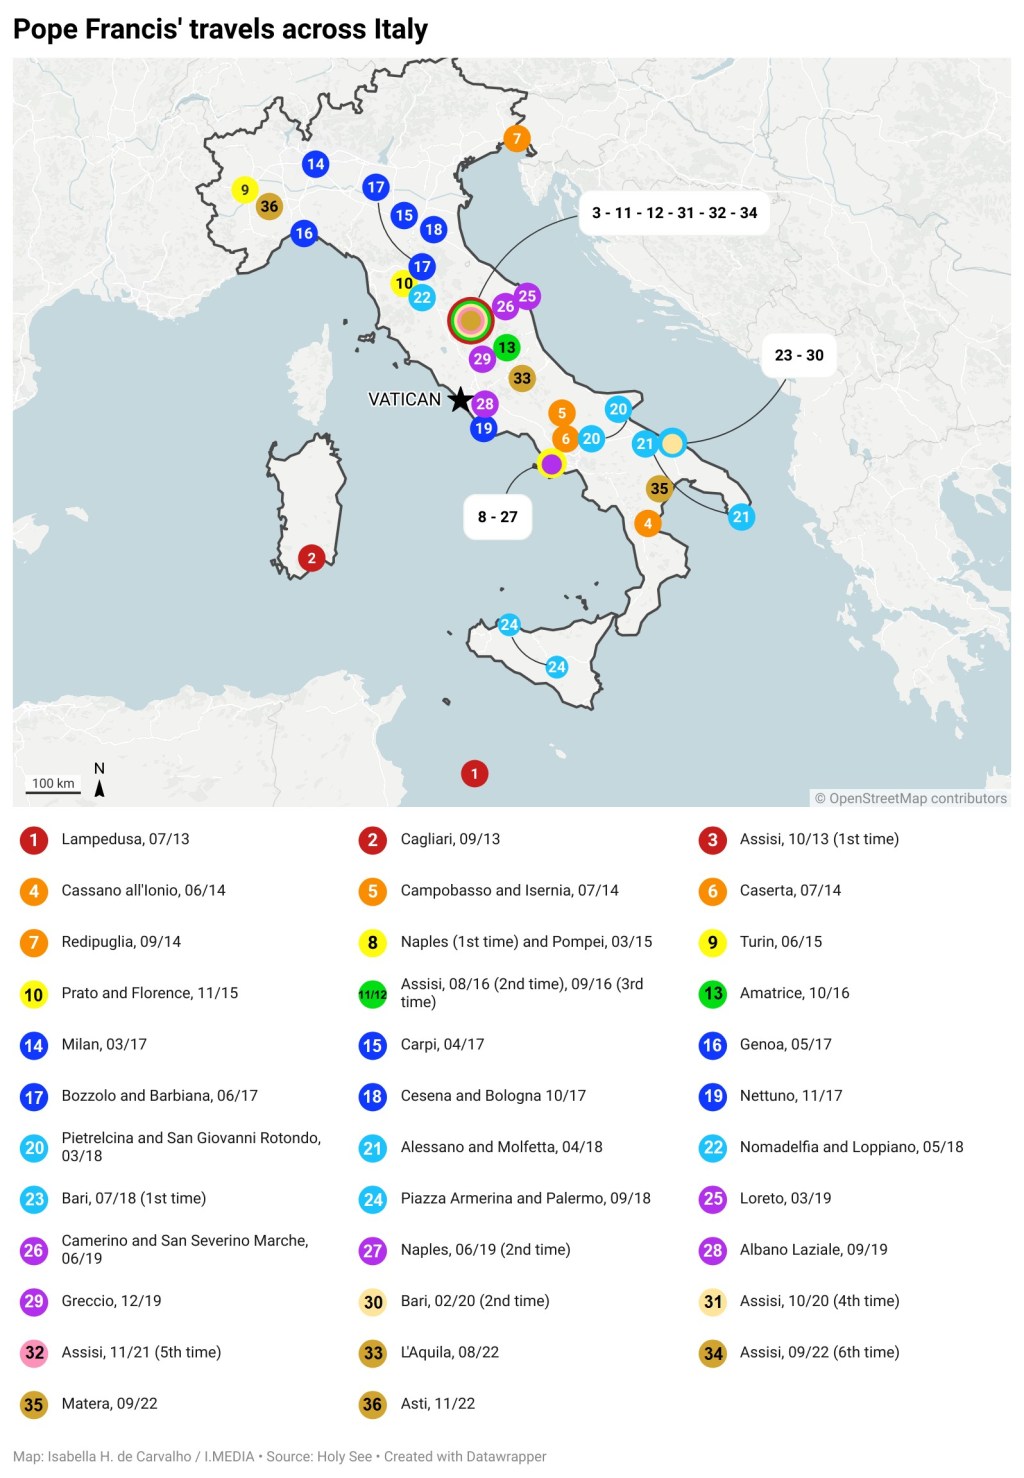 A map of Pope Francis' travels in Italy